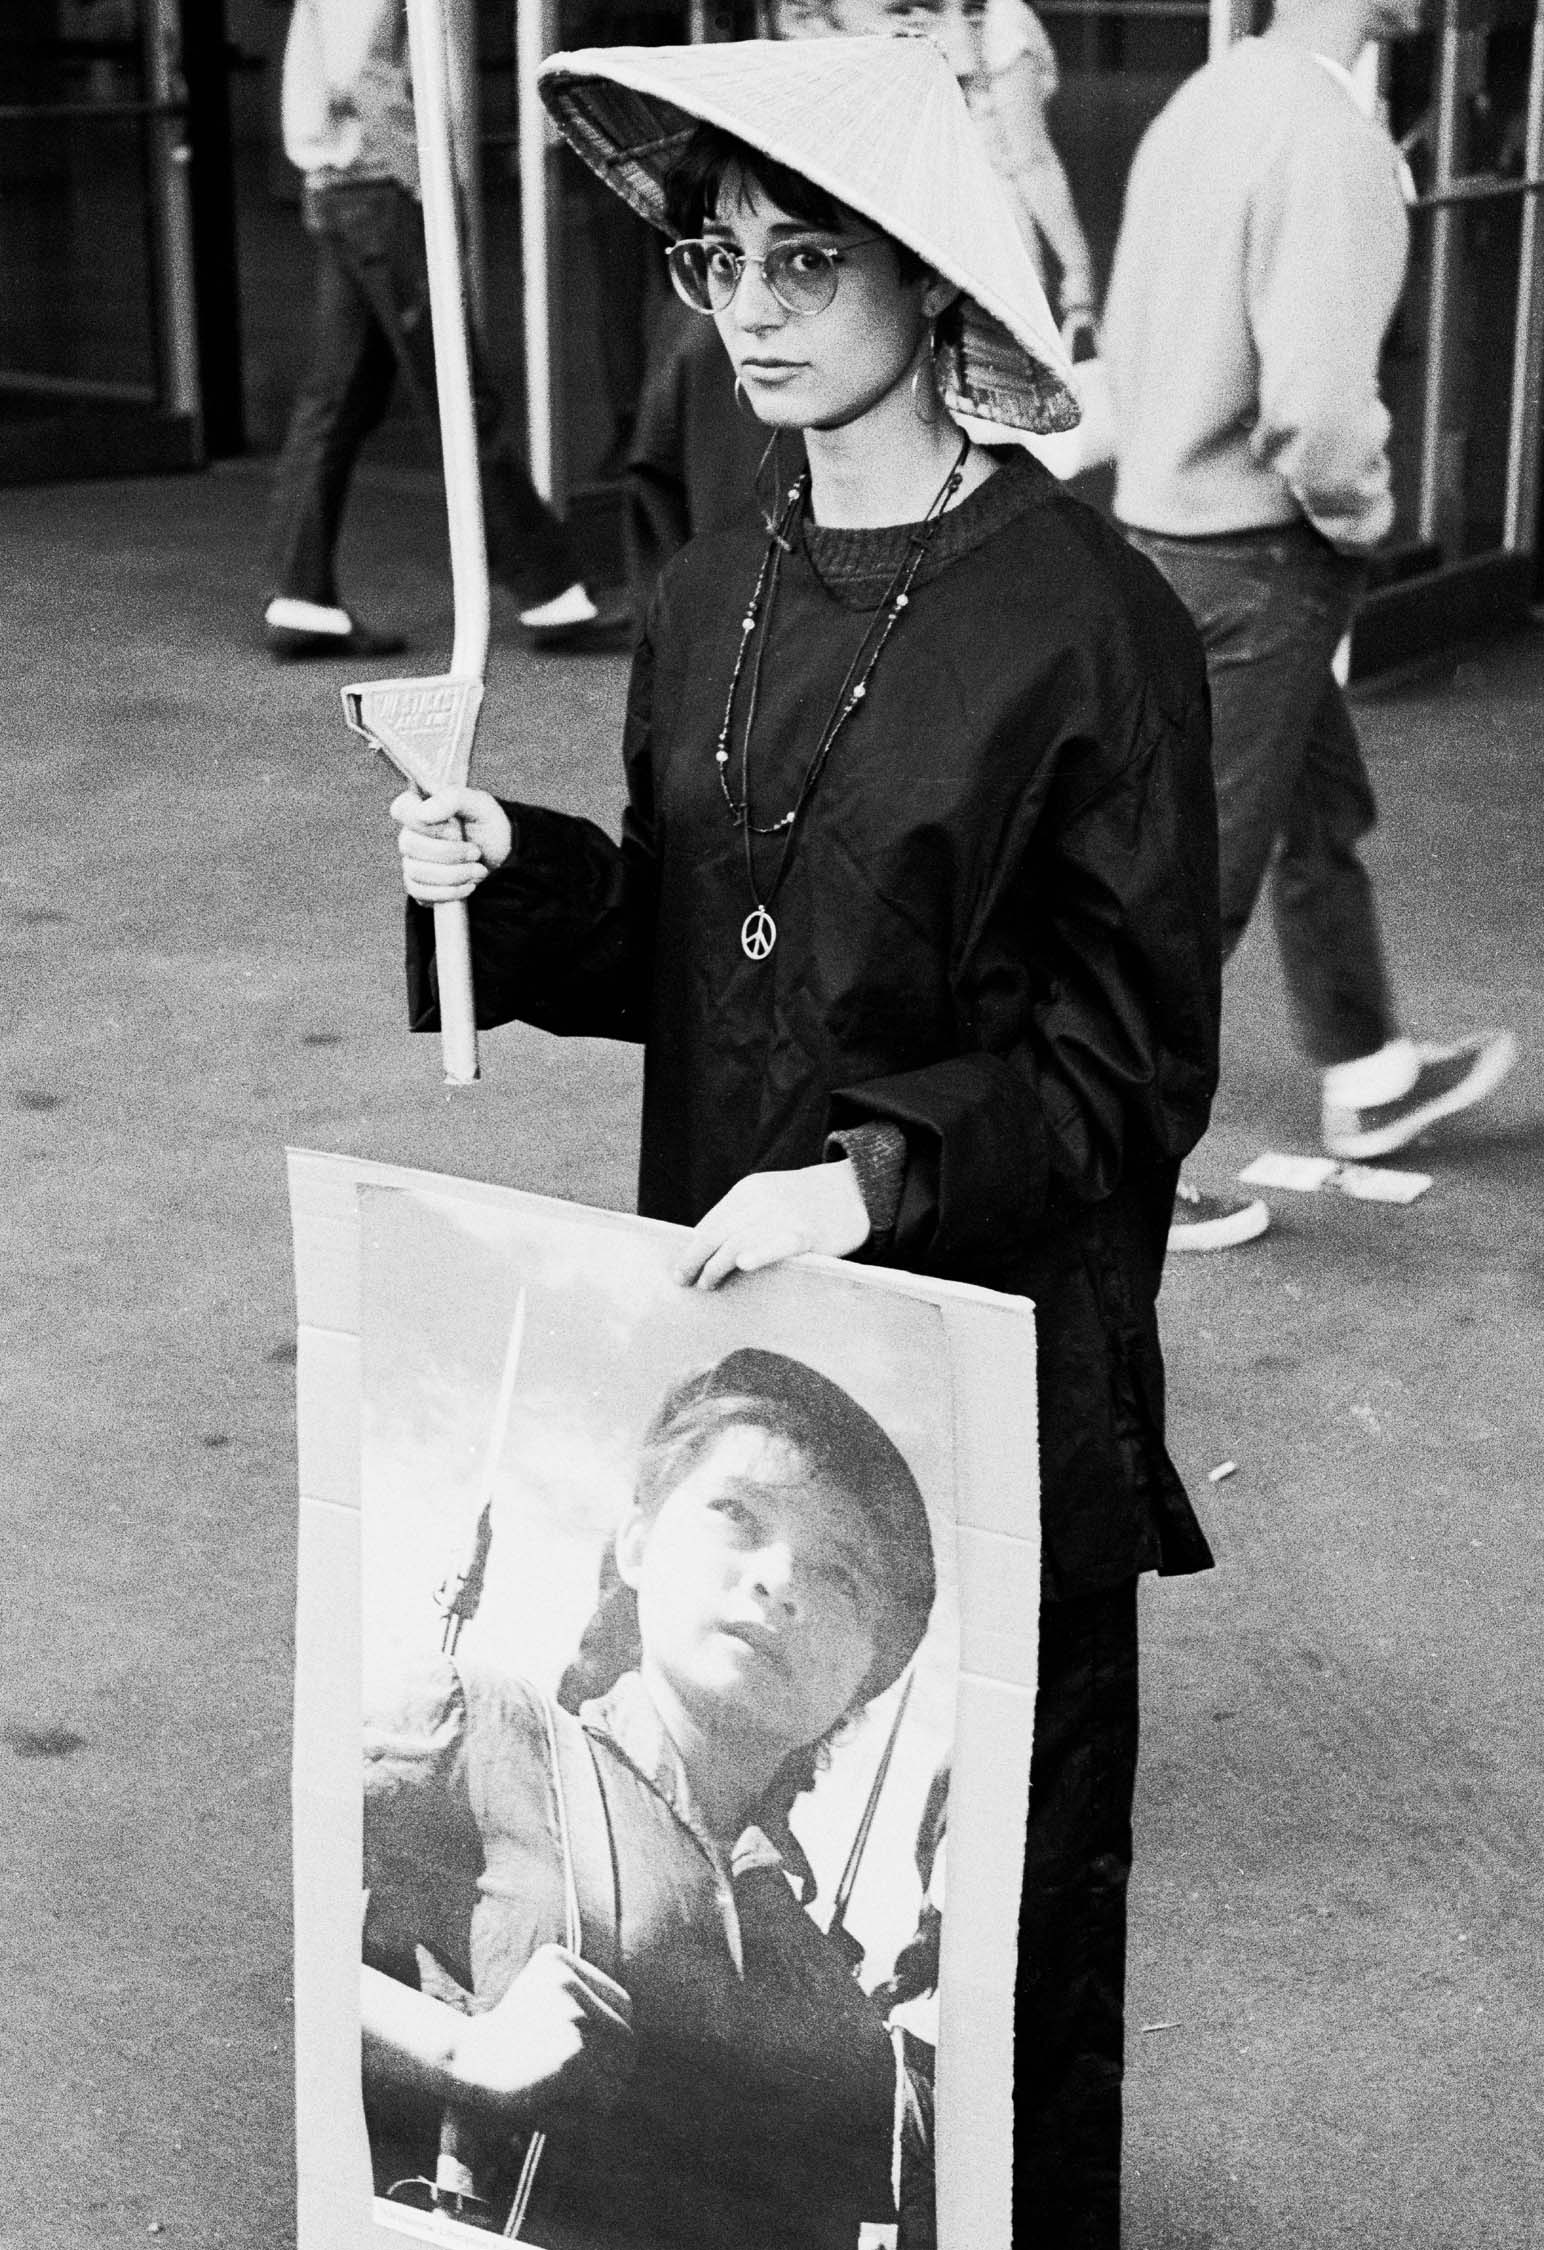 Susan Stern, one of the Seattle Liberation Front leaders and a Seattle Seven defendant. (Photo courtesy of Fred Lonidier)